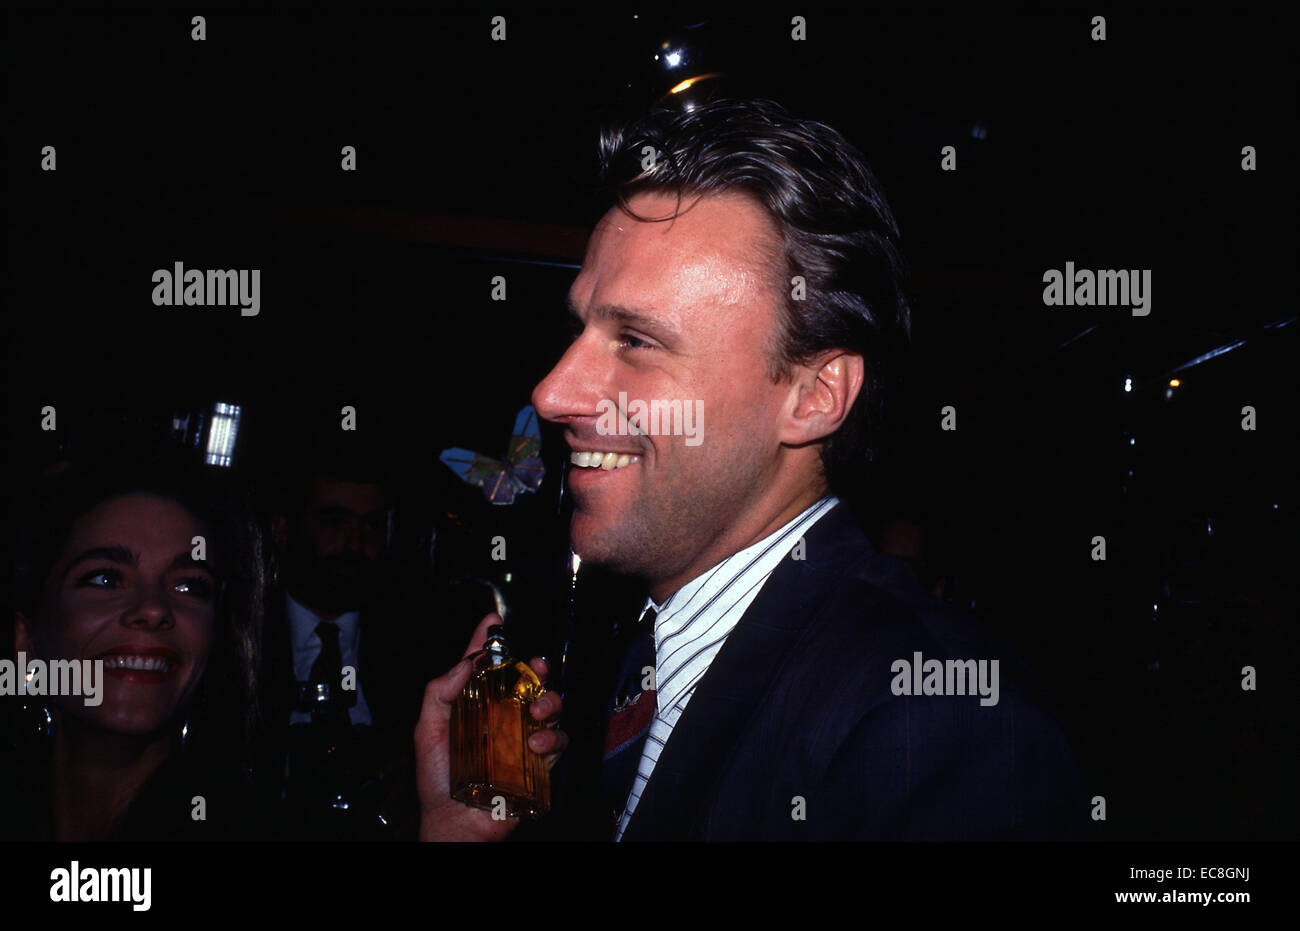 Former tennis legend Bjorn Borg launches his first woman's fragance with girlfriend Jannike Bjorling in London's Stringfellows nightclub Stock Photo